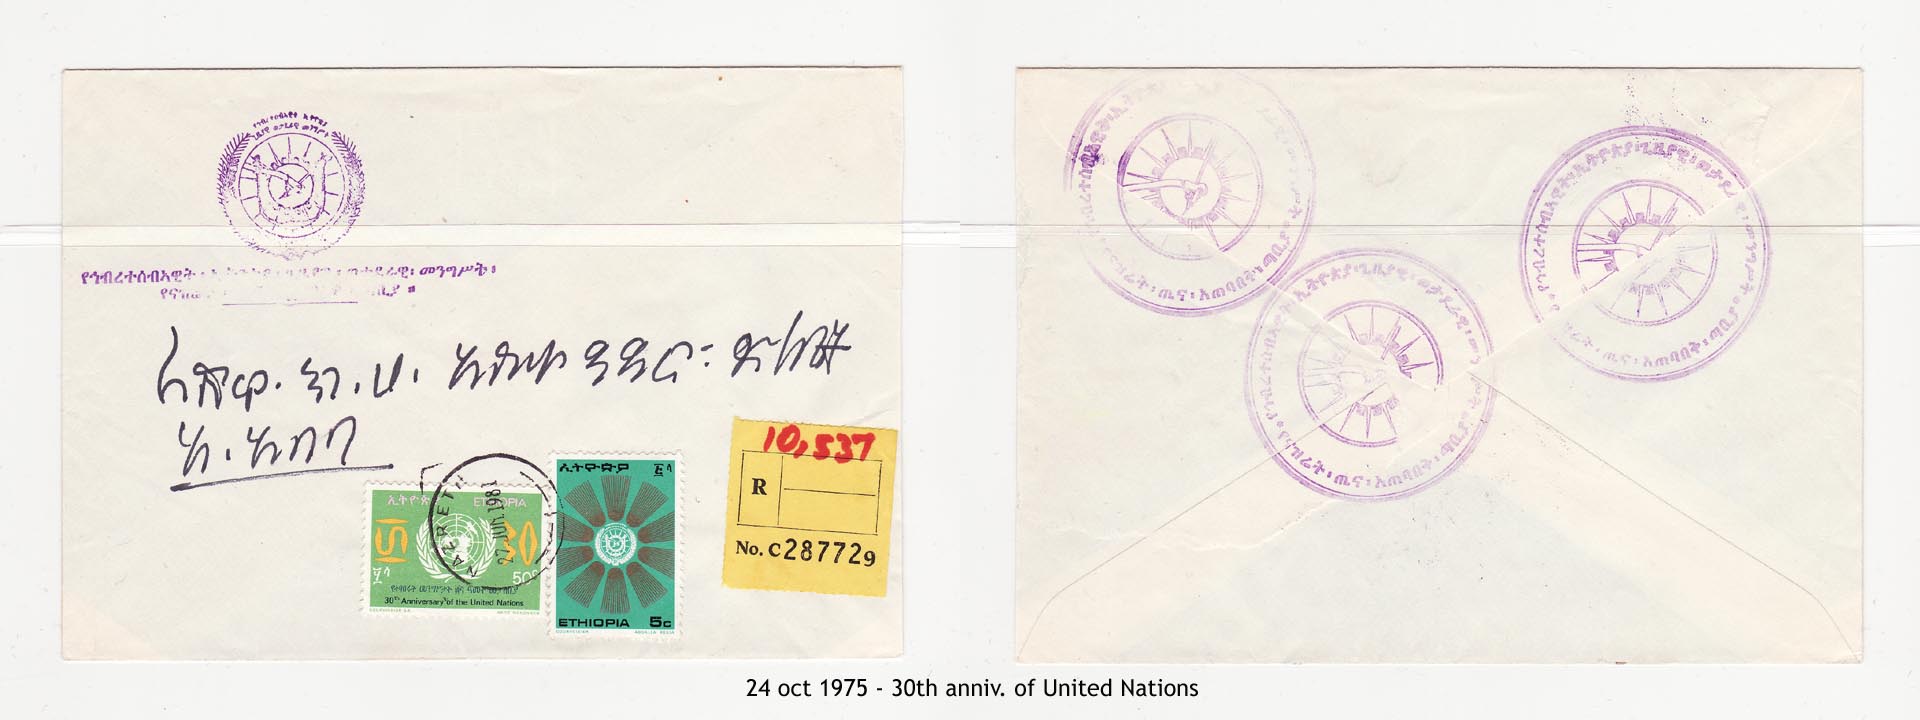 19751024 - 30th anniv. of United Nations